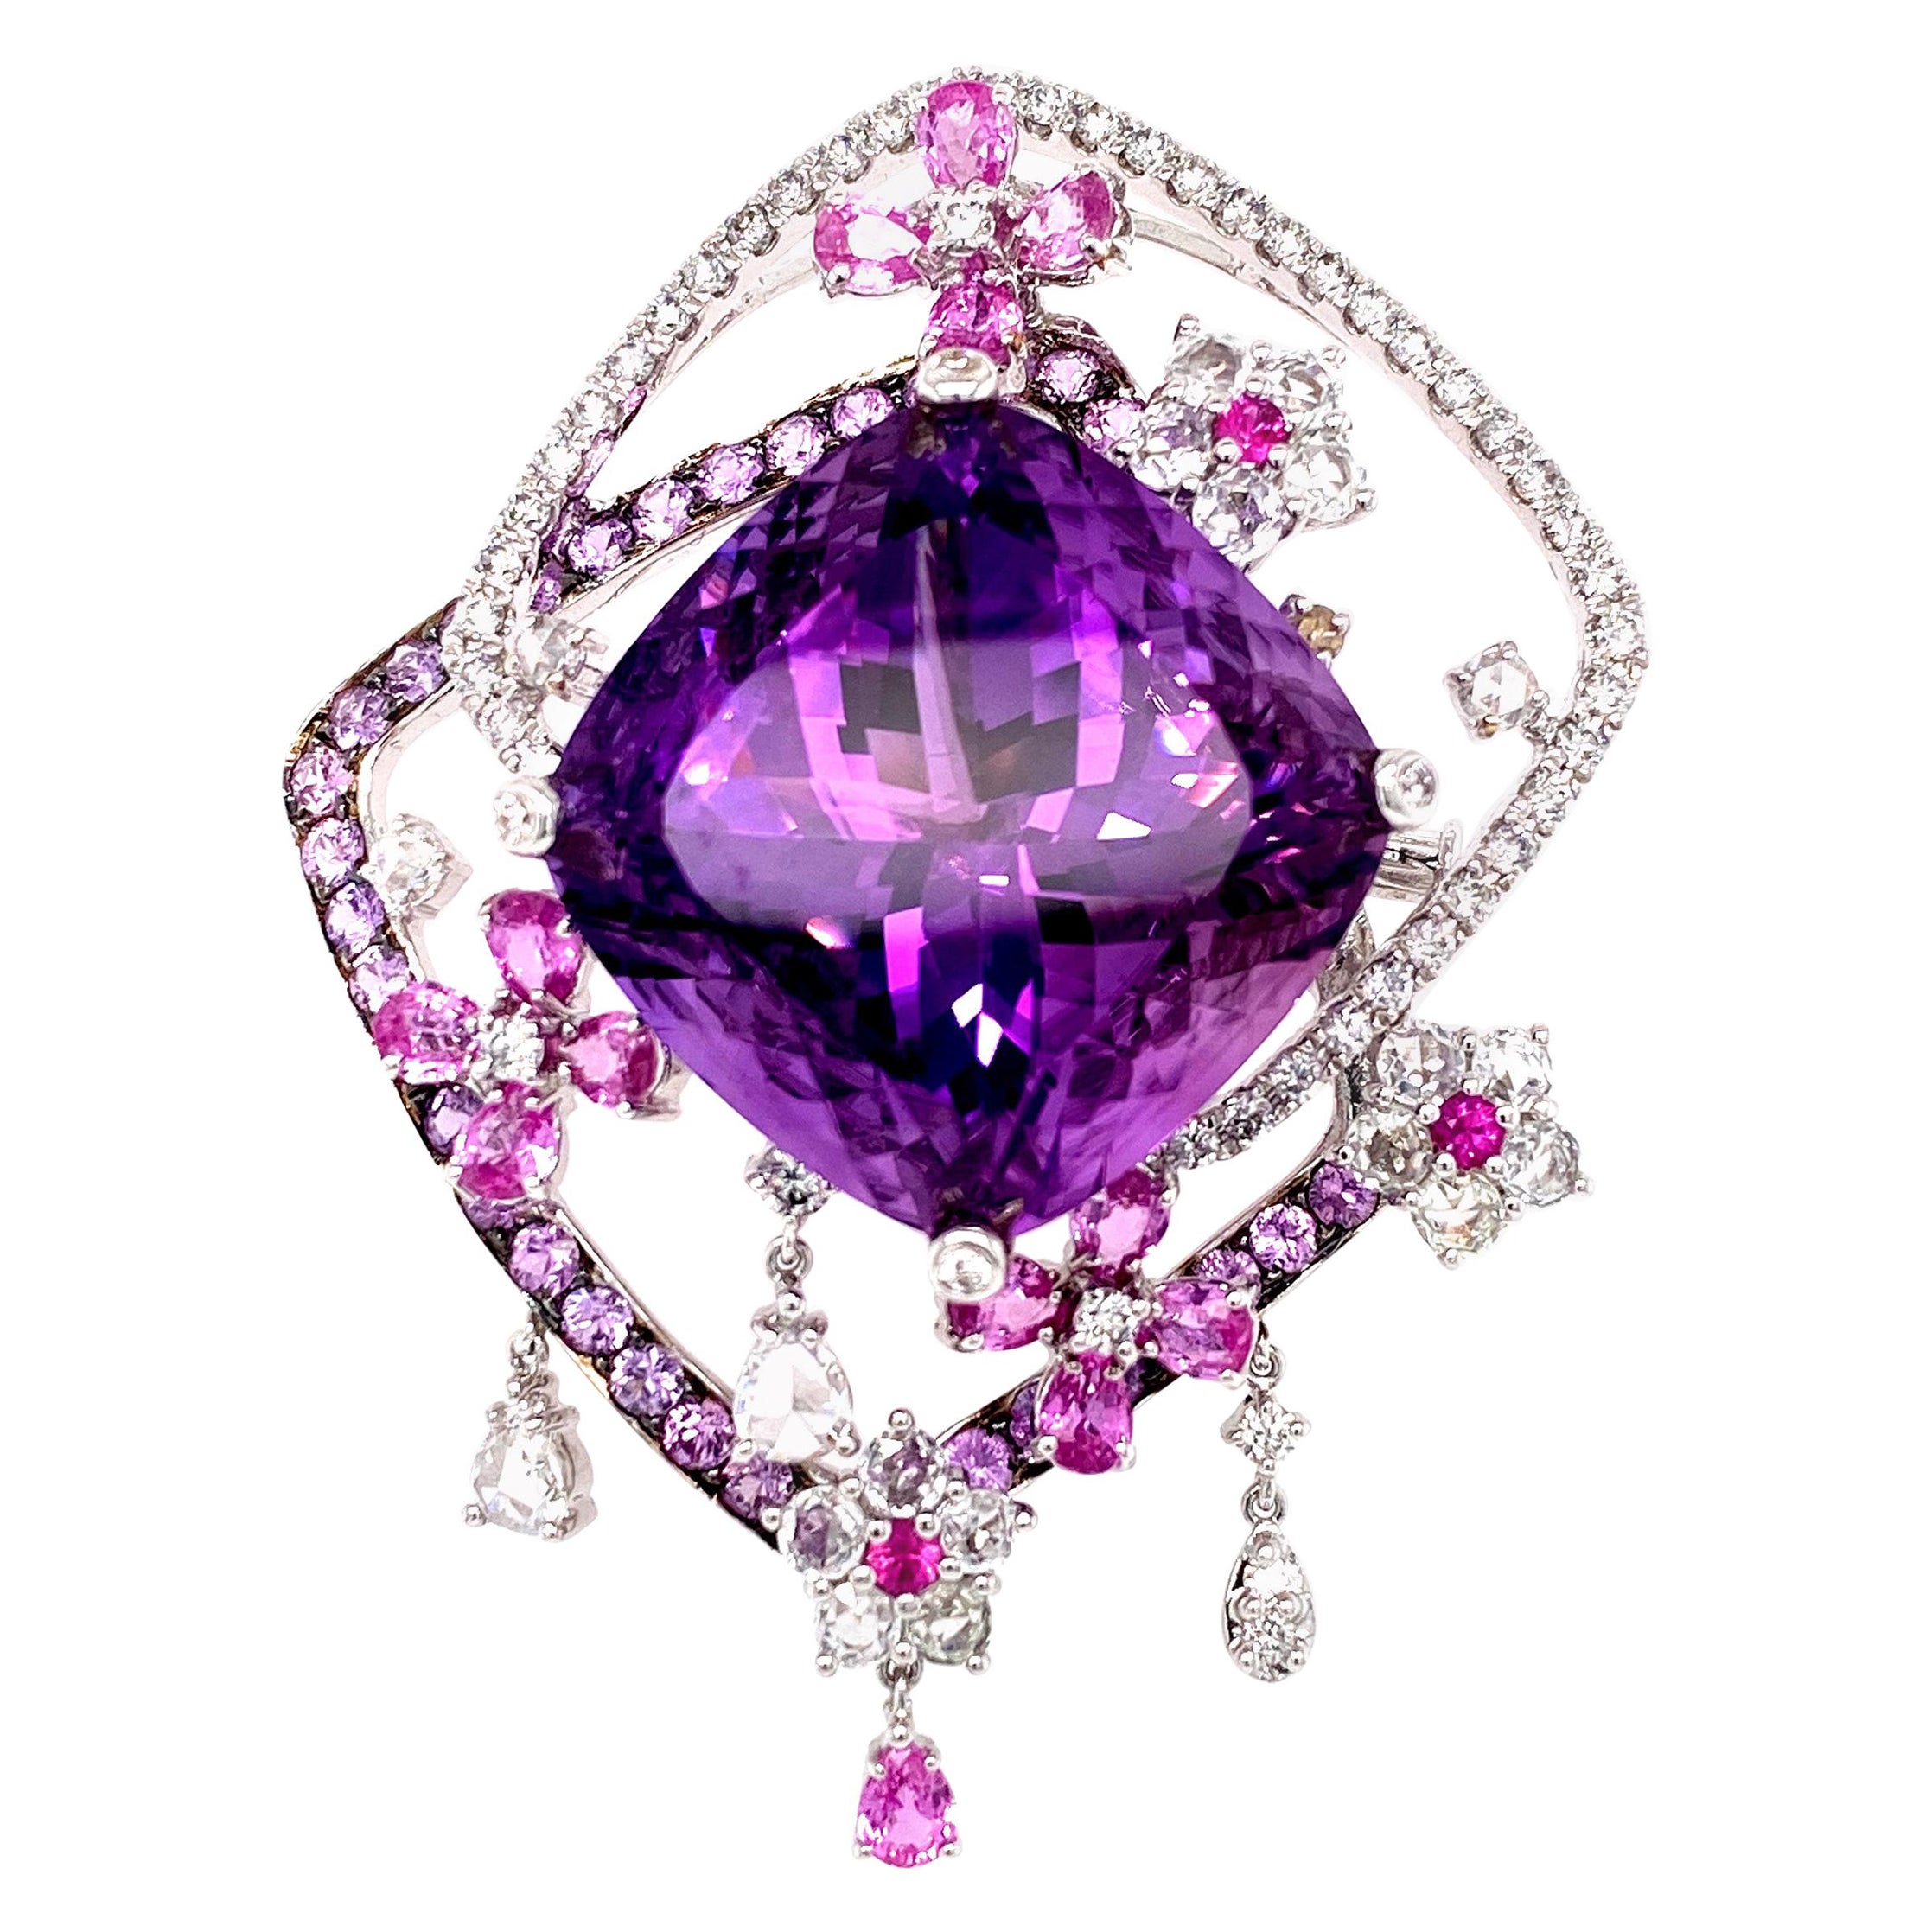 Dilys' Floral Motif Amethyst and Diamond Brooch in 18 Karat White Gold